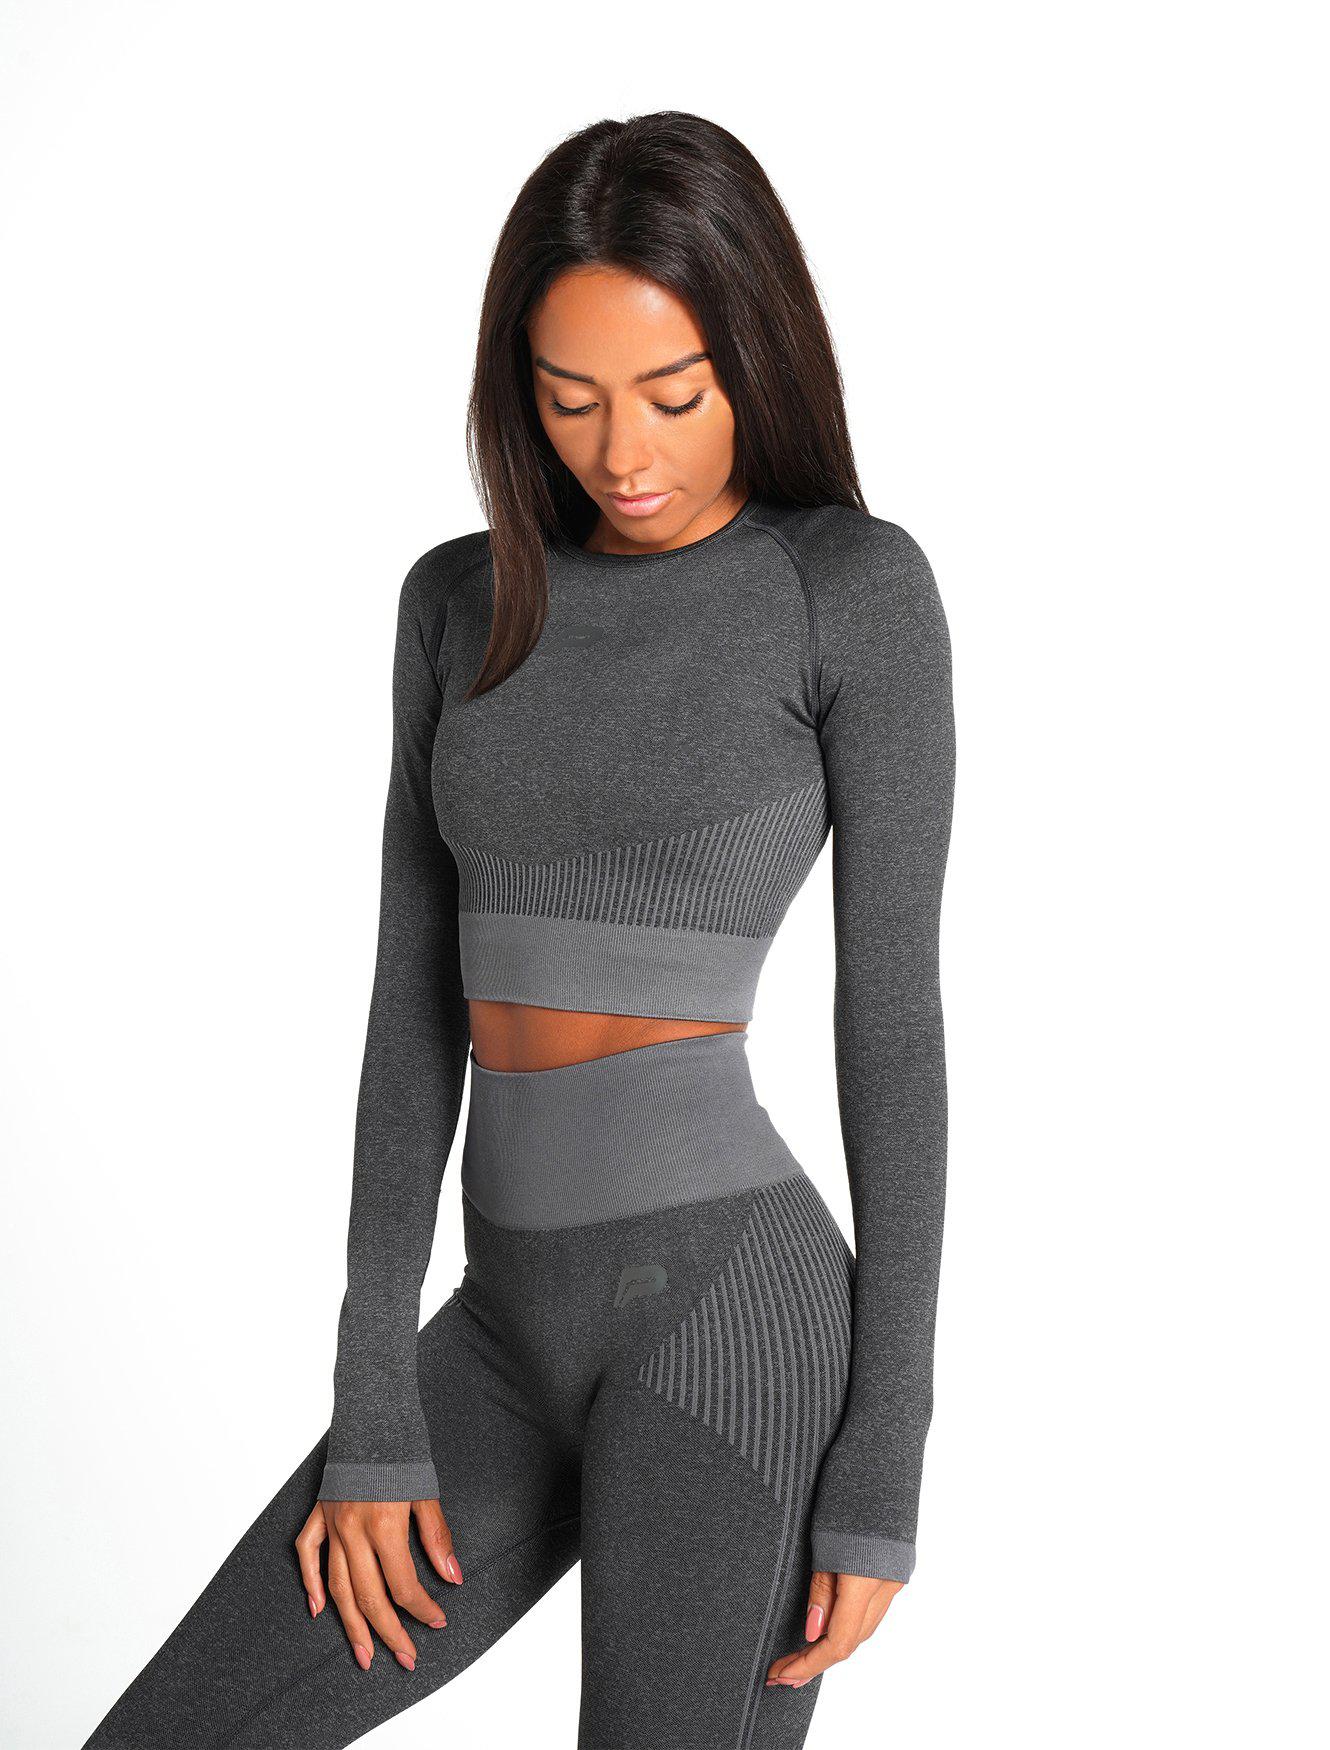 ADAPT Seamless Long Sleeve Crop Top / Black.Charcoal Pursue Fitness 1